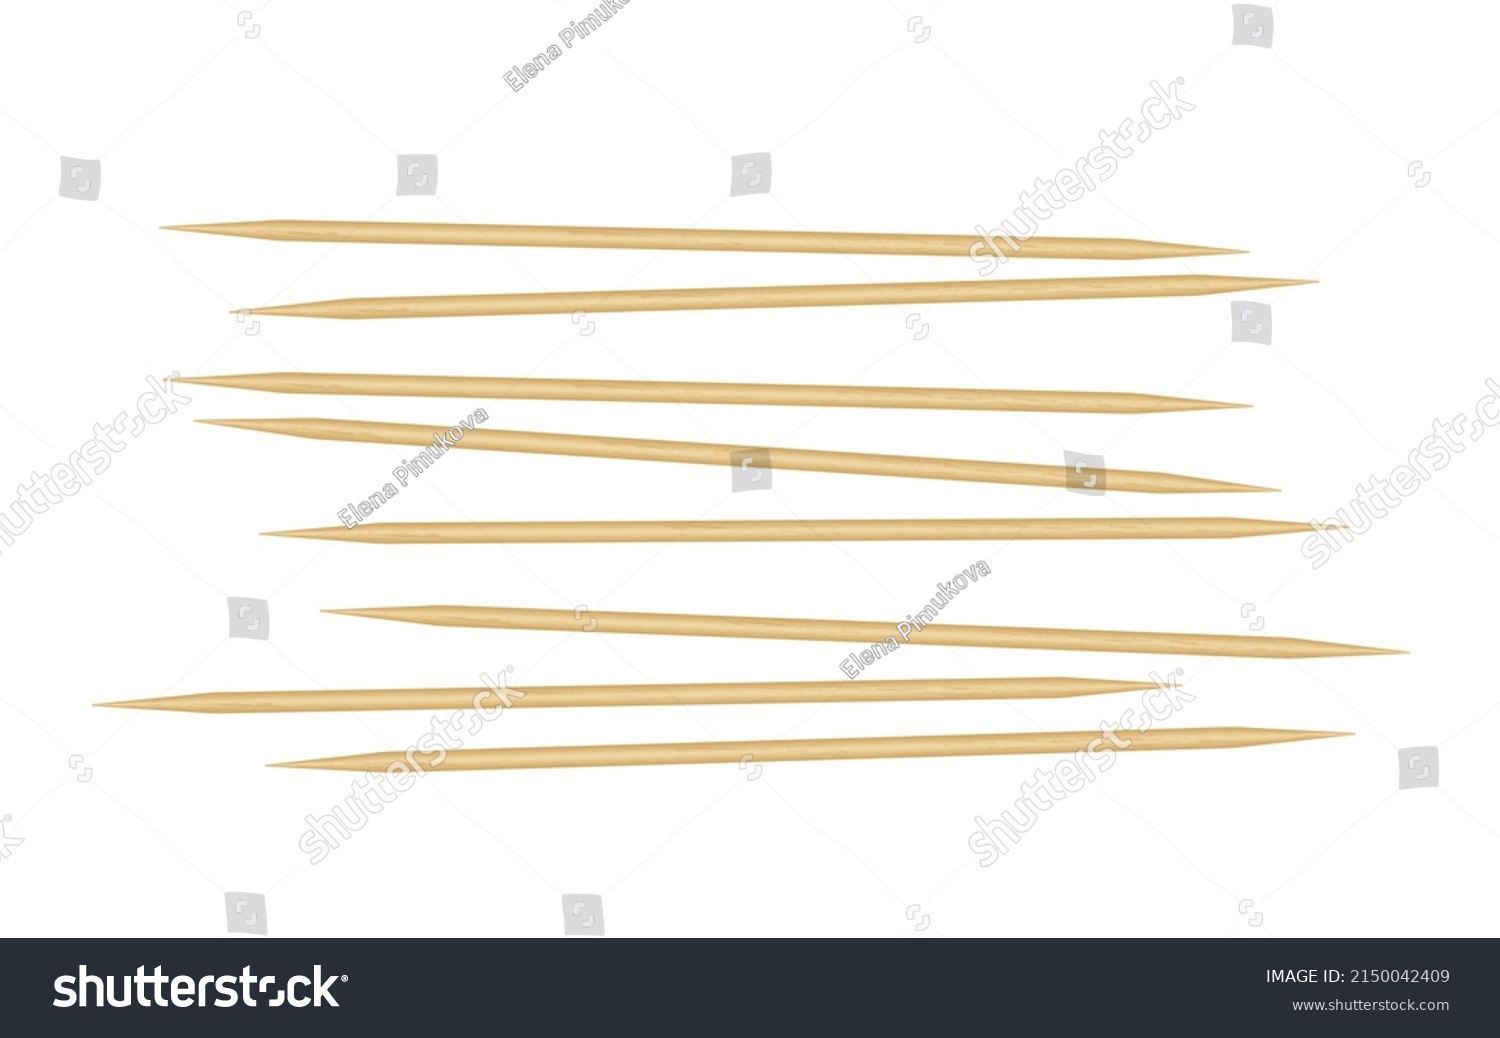 SVG of Wooden toothpick. Sharp bamboo sticks for teeth. Wood skewer with pointed tip. Disposable bamboo thin long skewer. Realistic vector illustration isolated on white background. svg